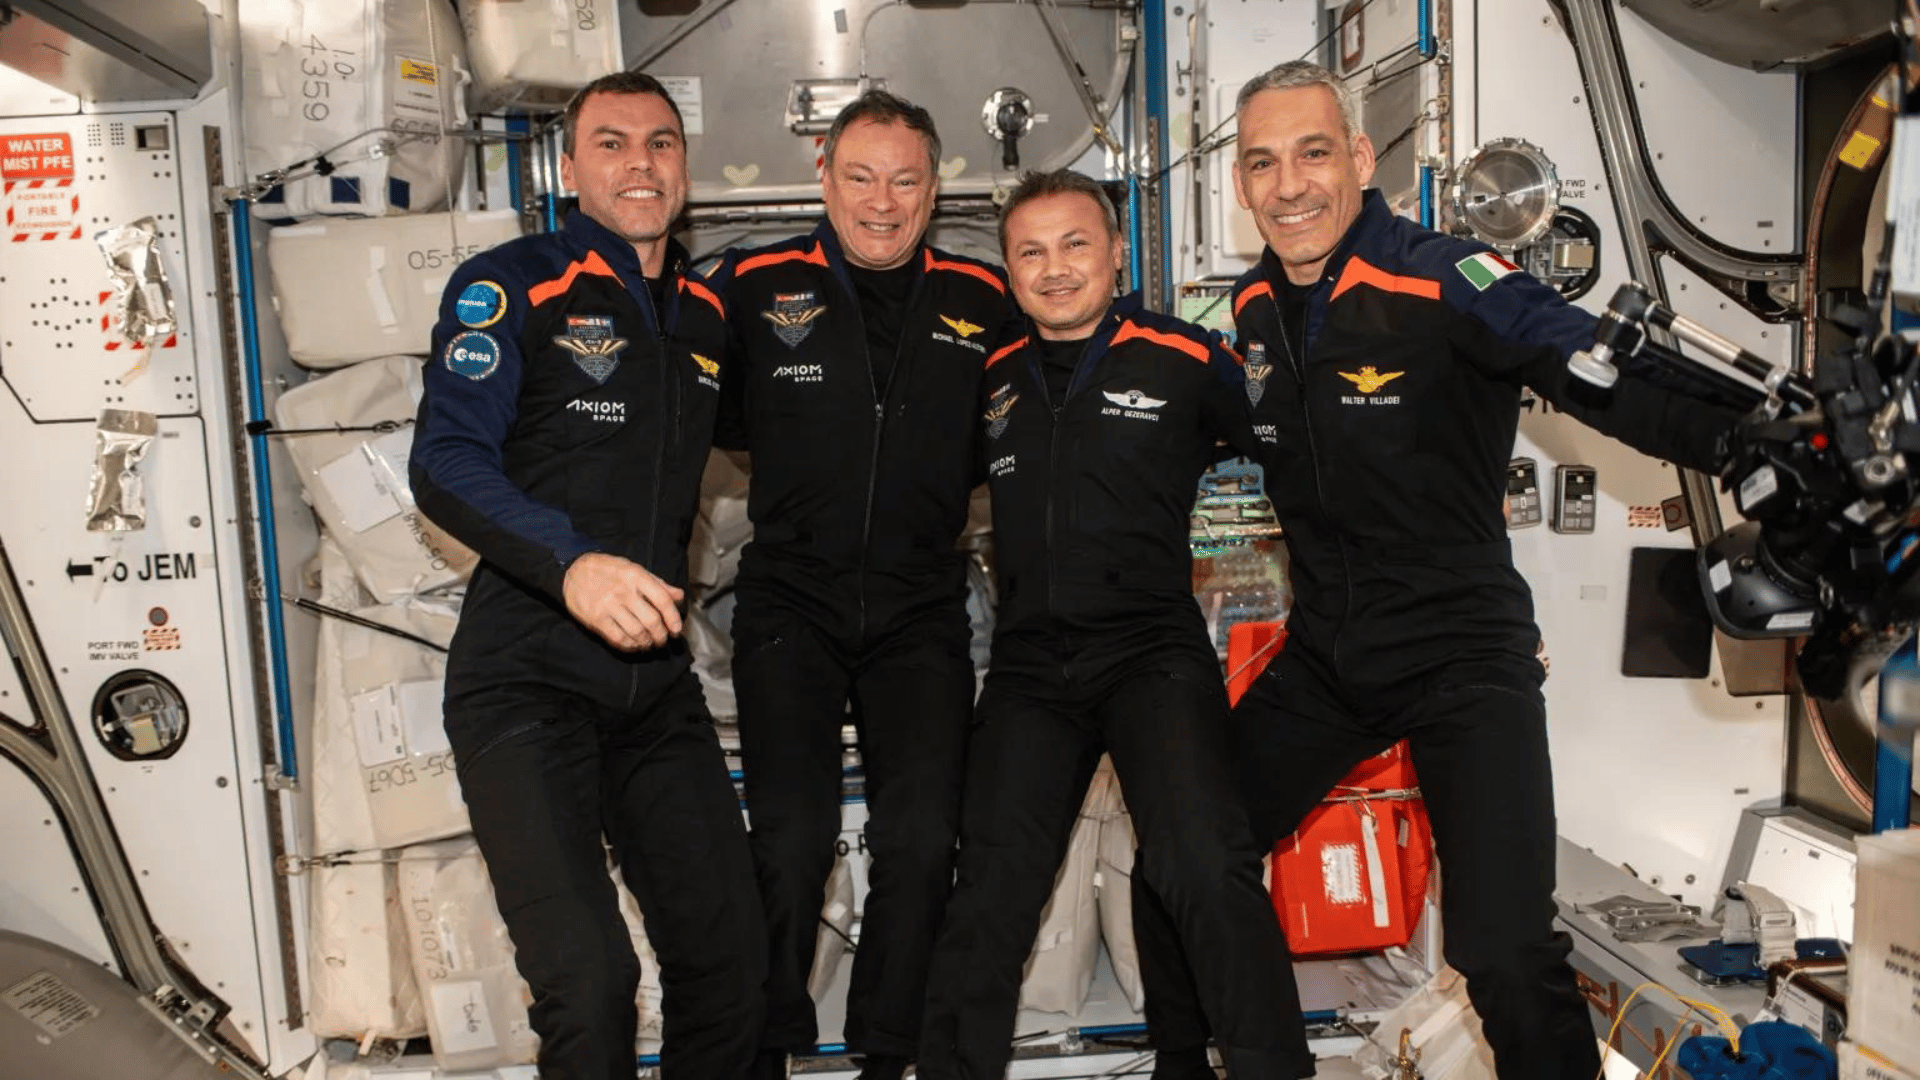 The Axiom Mission 3 crew aboard the International Space Station, pictured from left to right: Marcus Wandt, Michael López-Alegría, Alper Gezeravci, and Walter Villadei. Credits: Axiom Space